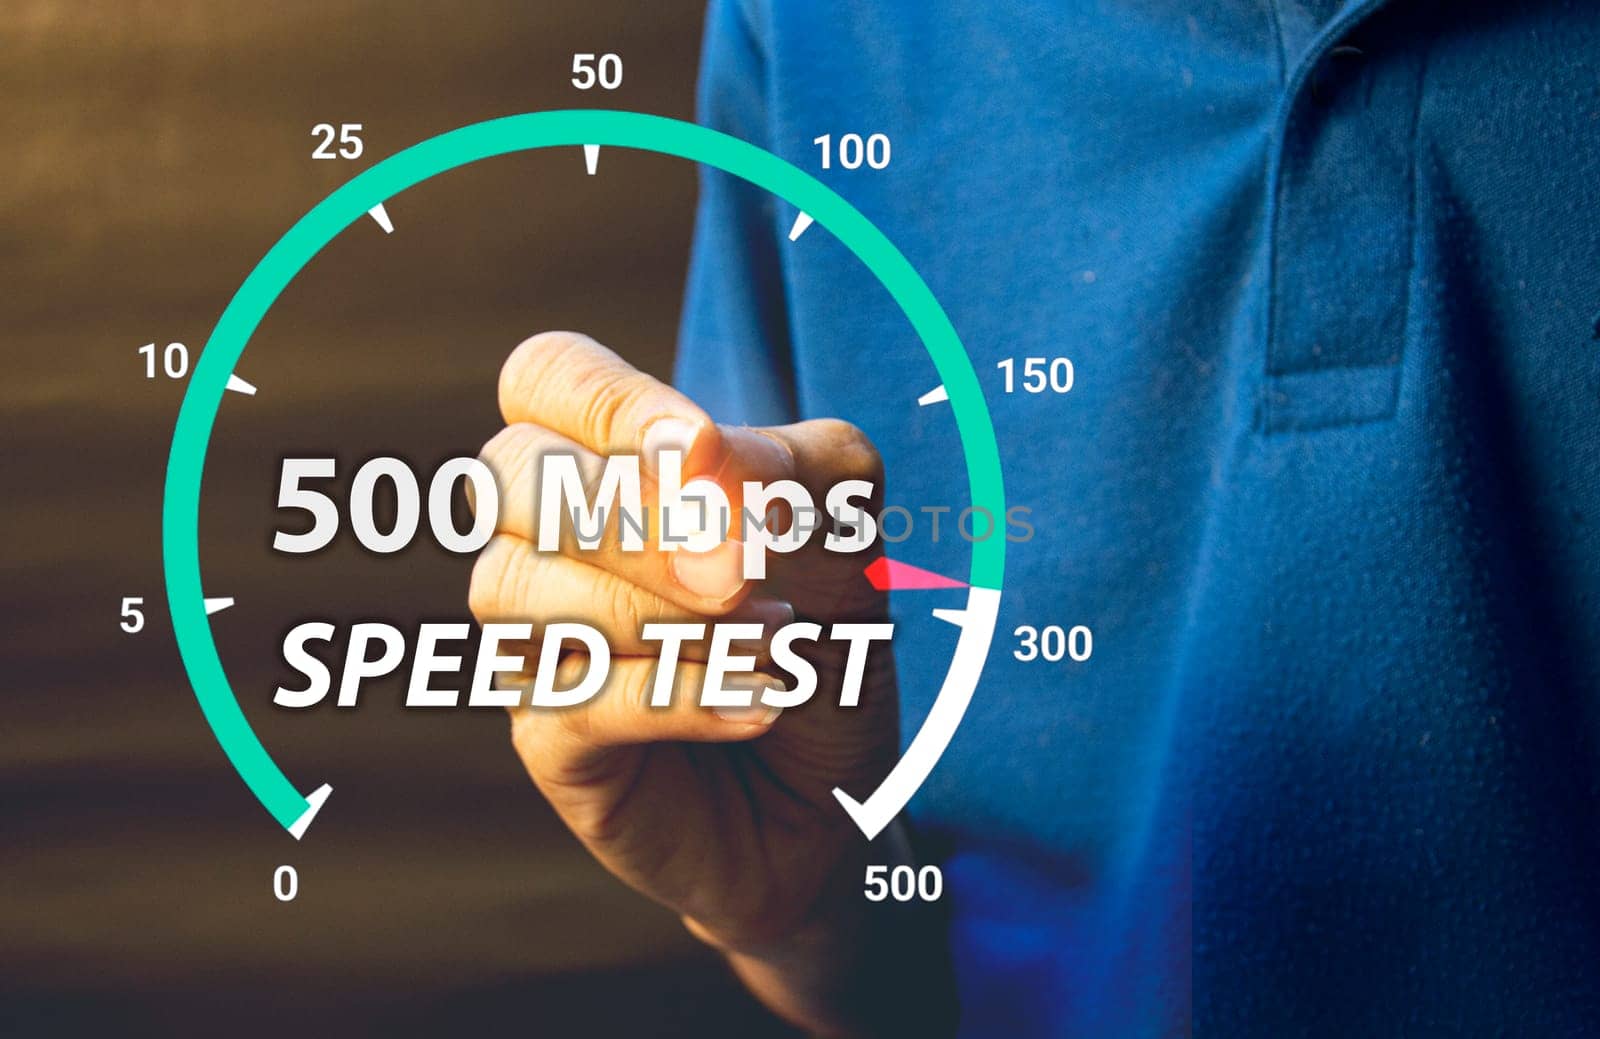 fast internet connection speedtest network bandwidth technology Man using high speed internet with smartphone and laptop computer. 5G quality, speed optimization.